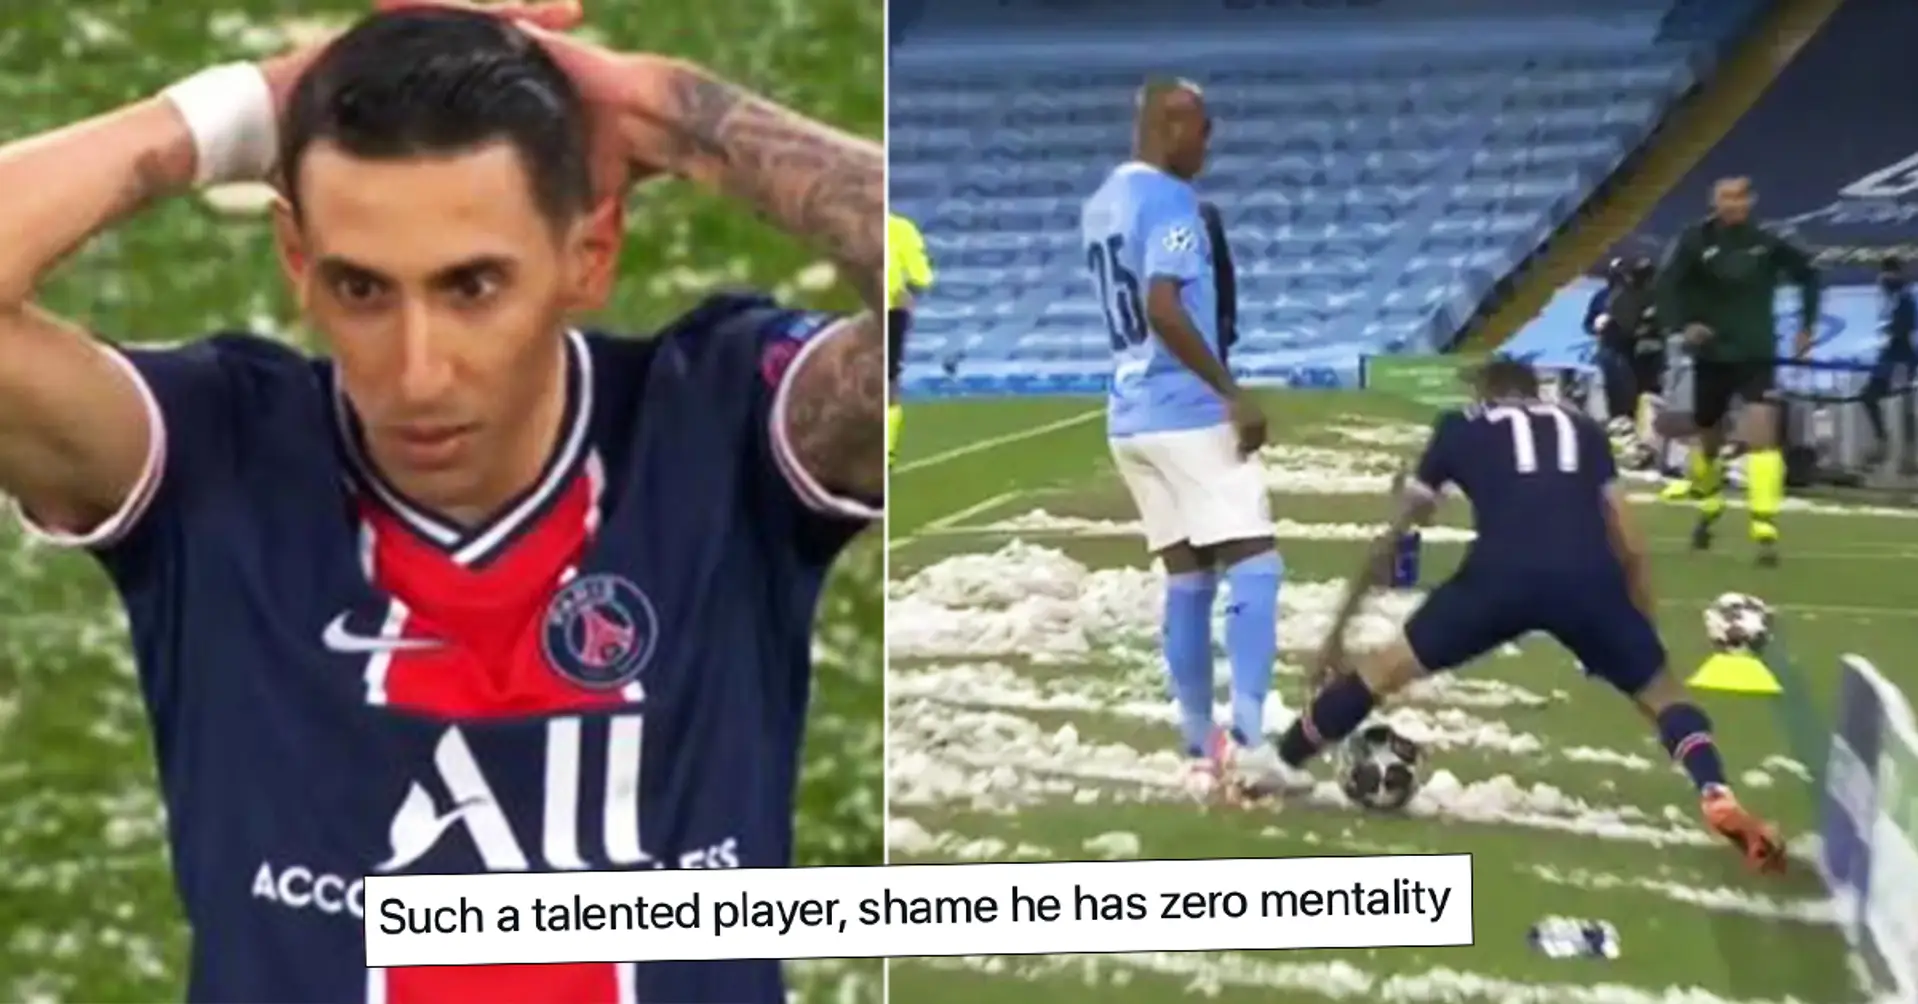 Revealed: What Di Maria told Fernandinho immediately after getting red card for brutal foul on him